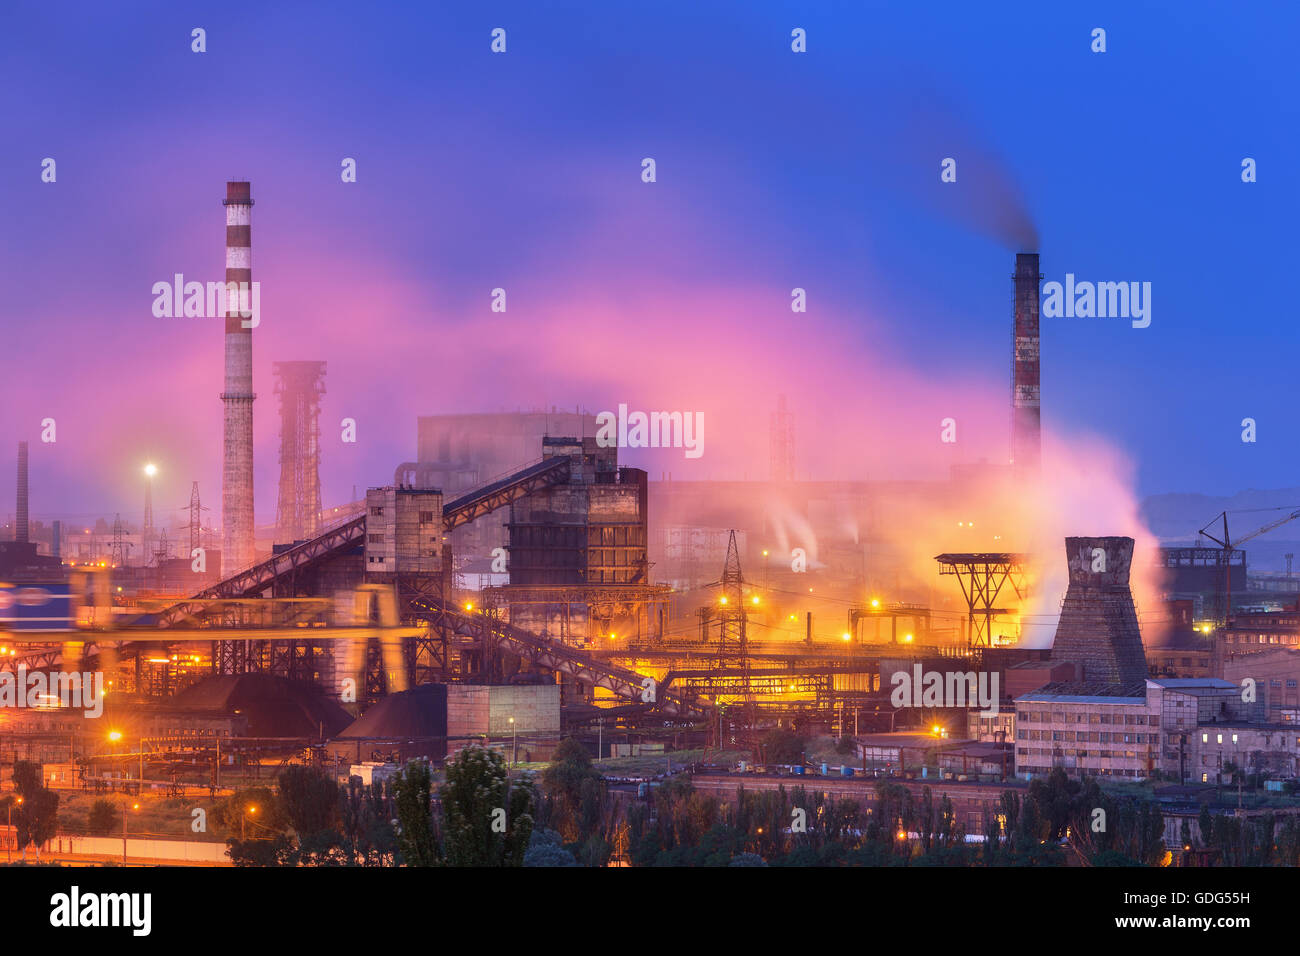 Metallurgical plant at night. Steel factory with smokestacks . Steelworks, iron works. Heavy industry in Europe. Air pollution Stock Photo